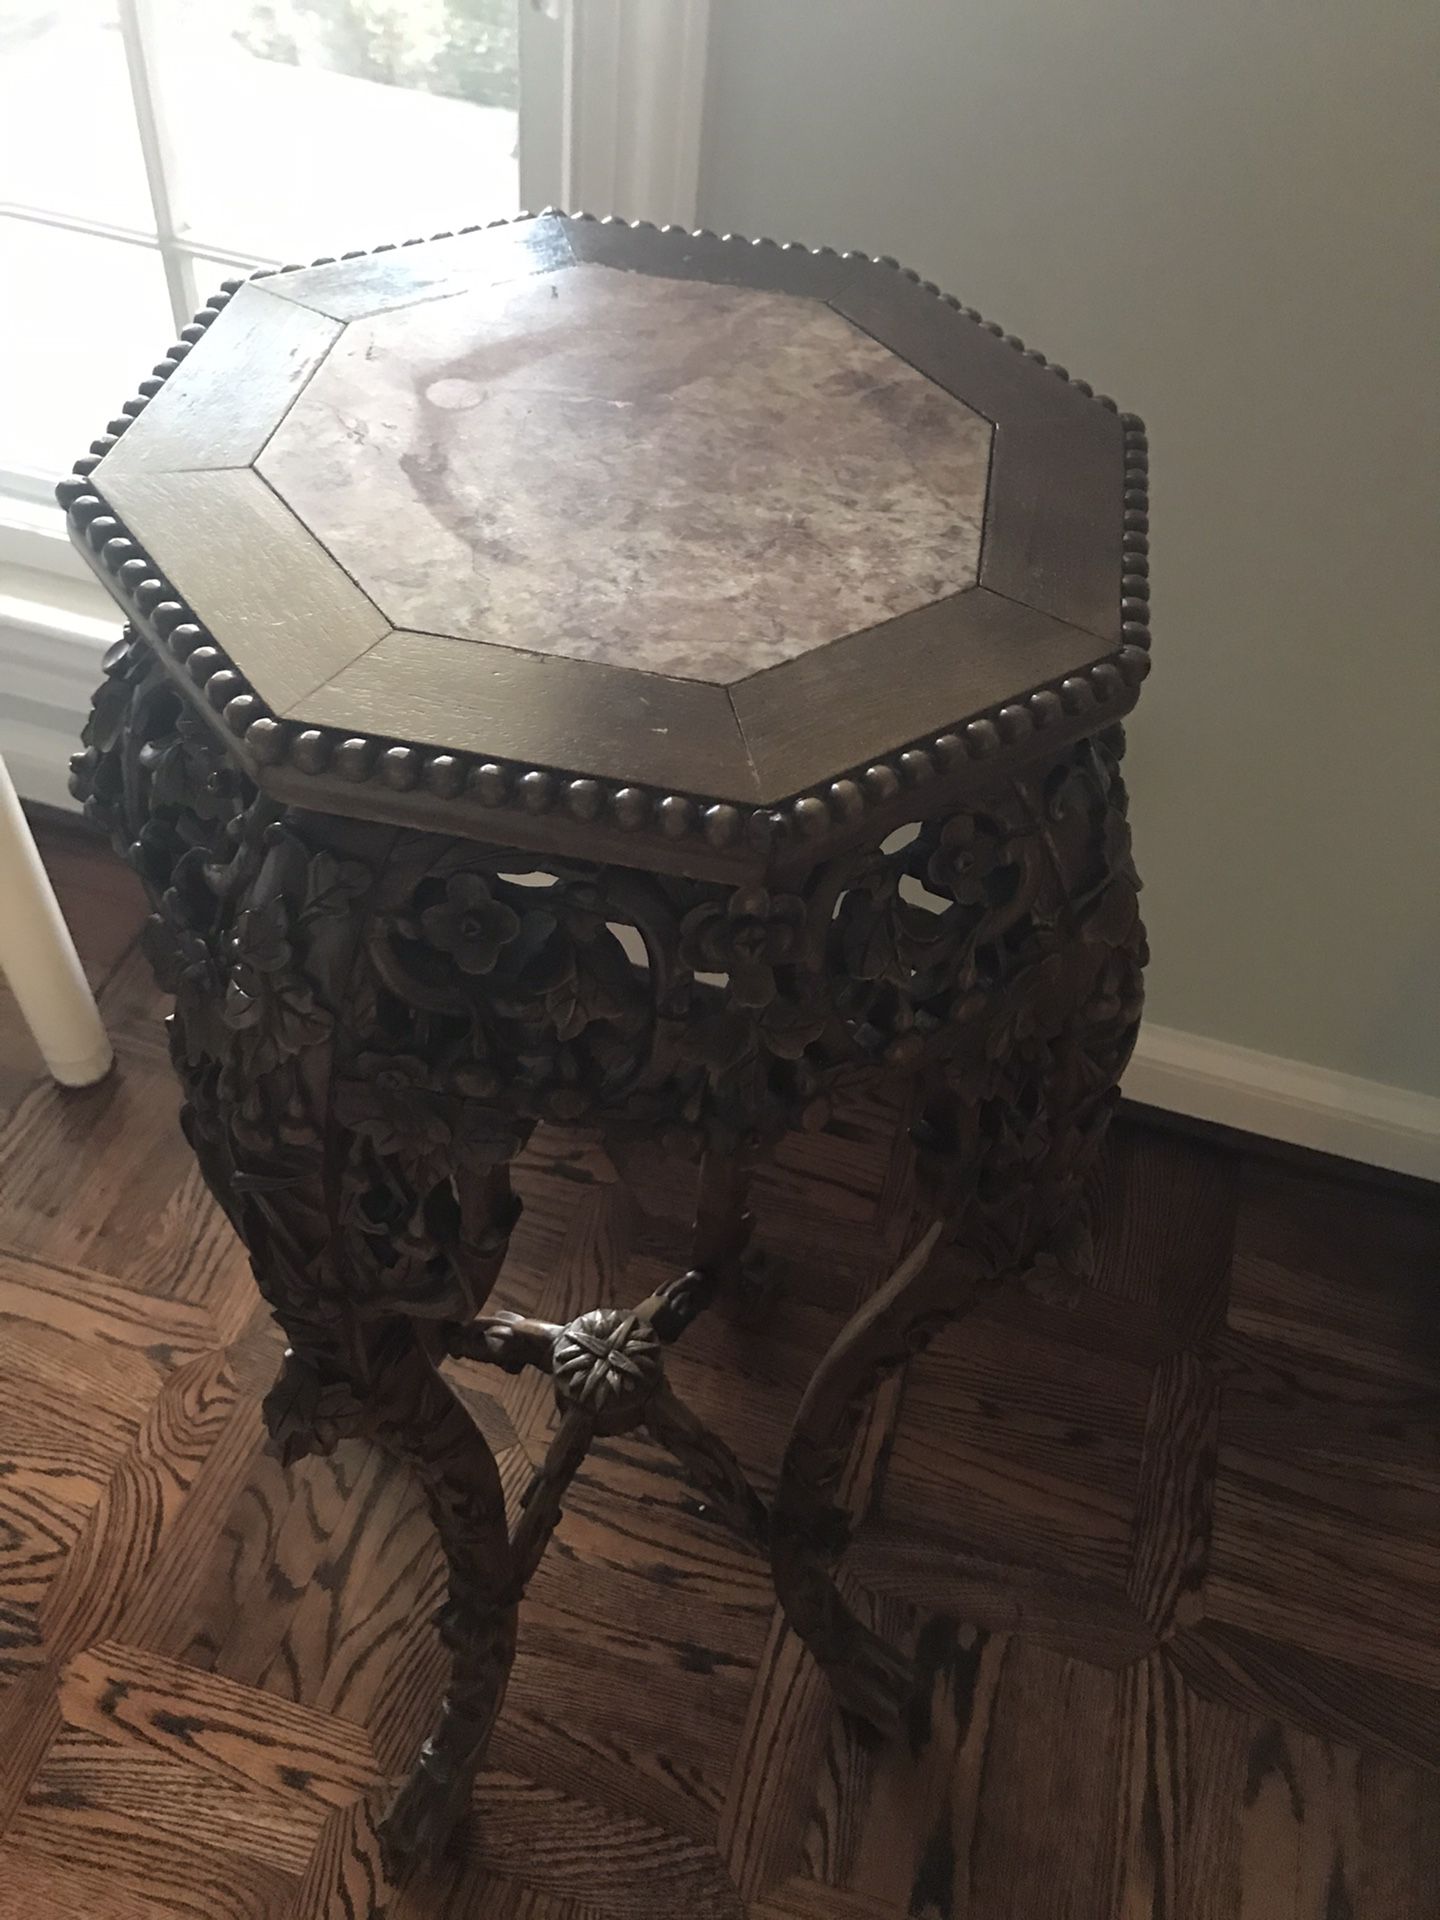 Antique Ornate Round Flower Stand/Table